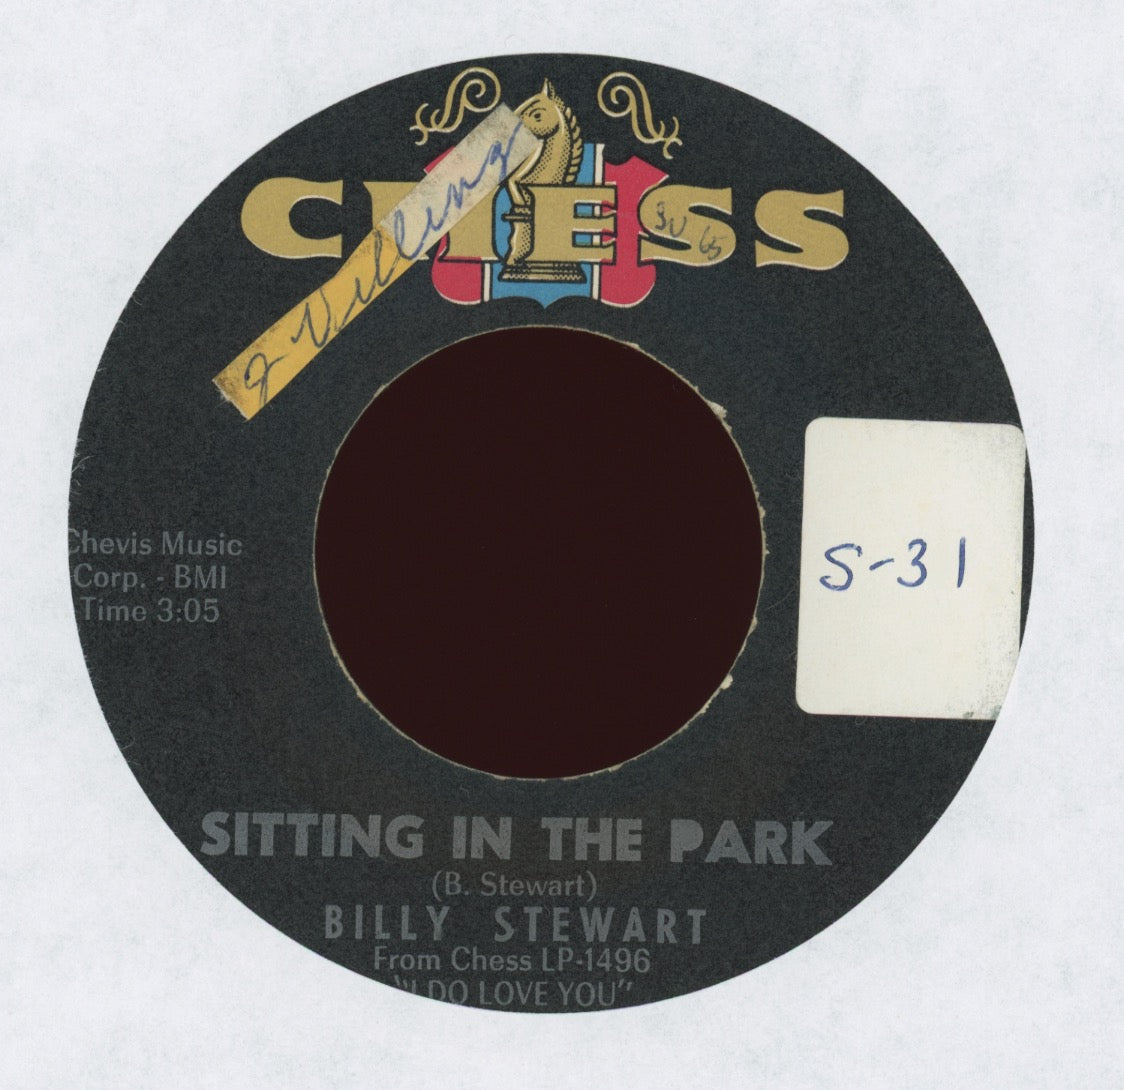 Billy Stewart - Sitting In The Park on Chess